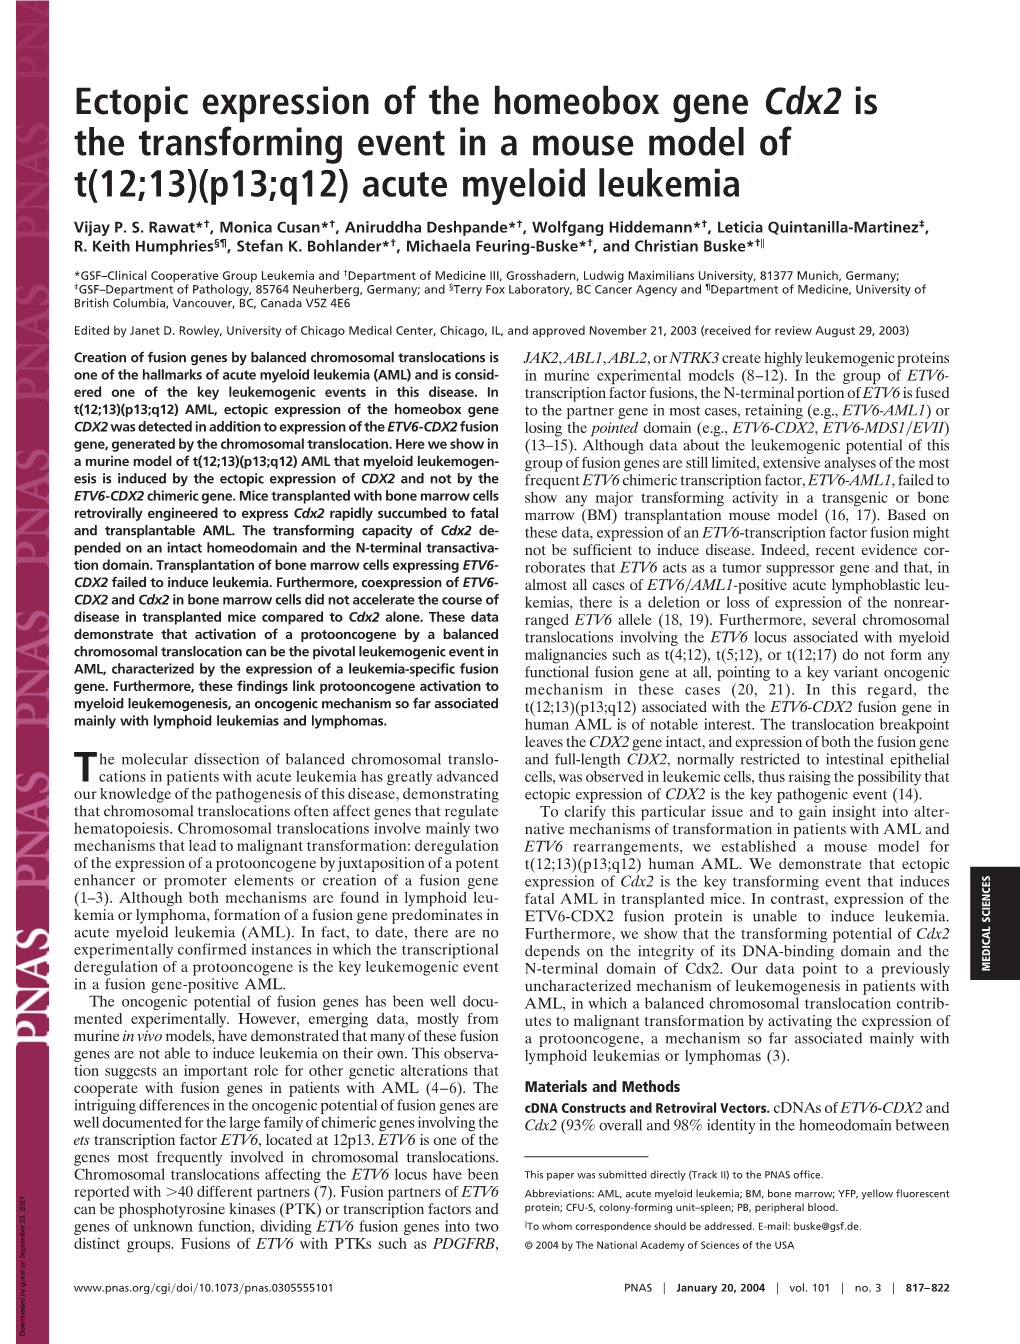 Ectopic Expression of the Homeobox Gene Cdx2 Is the Transforming Event in a Mouse Model of T(12;13)(P13;Q12) Acute Myeloid Leukemia